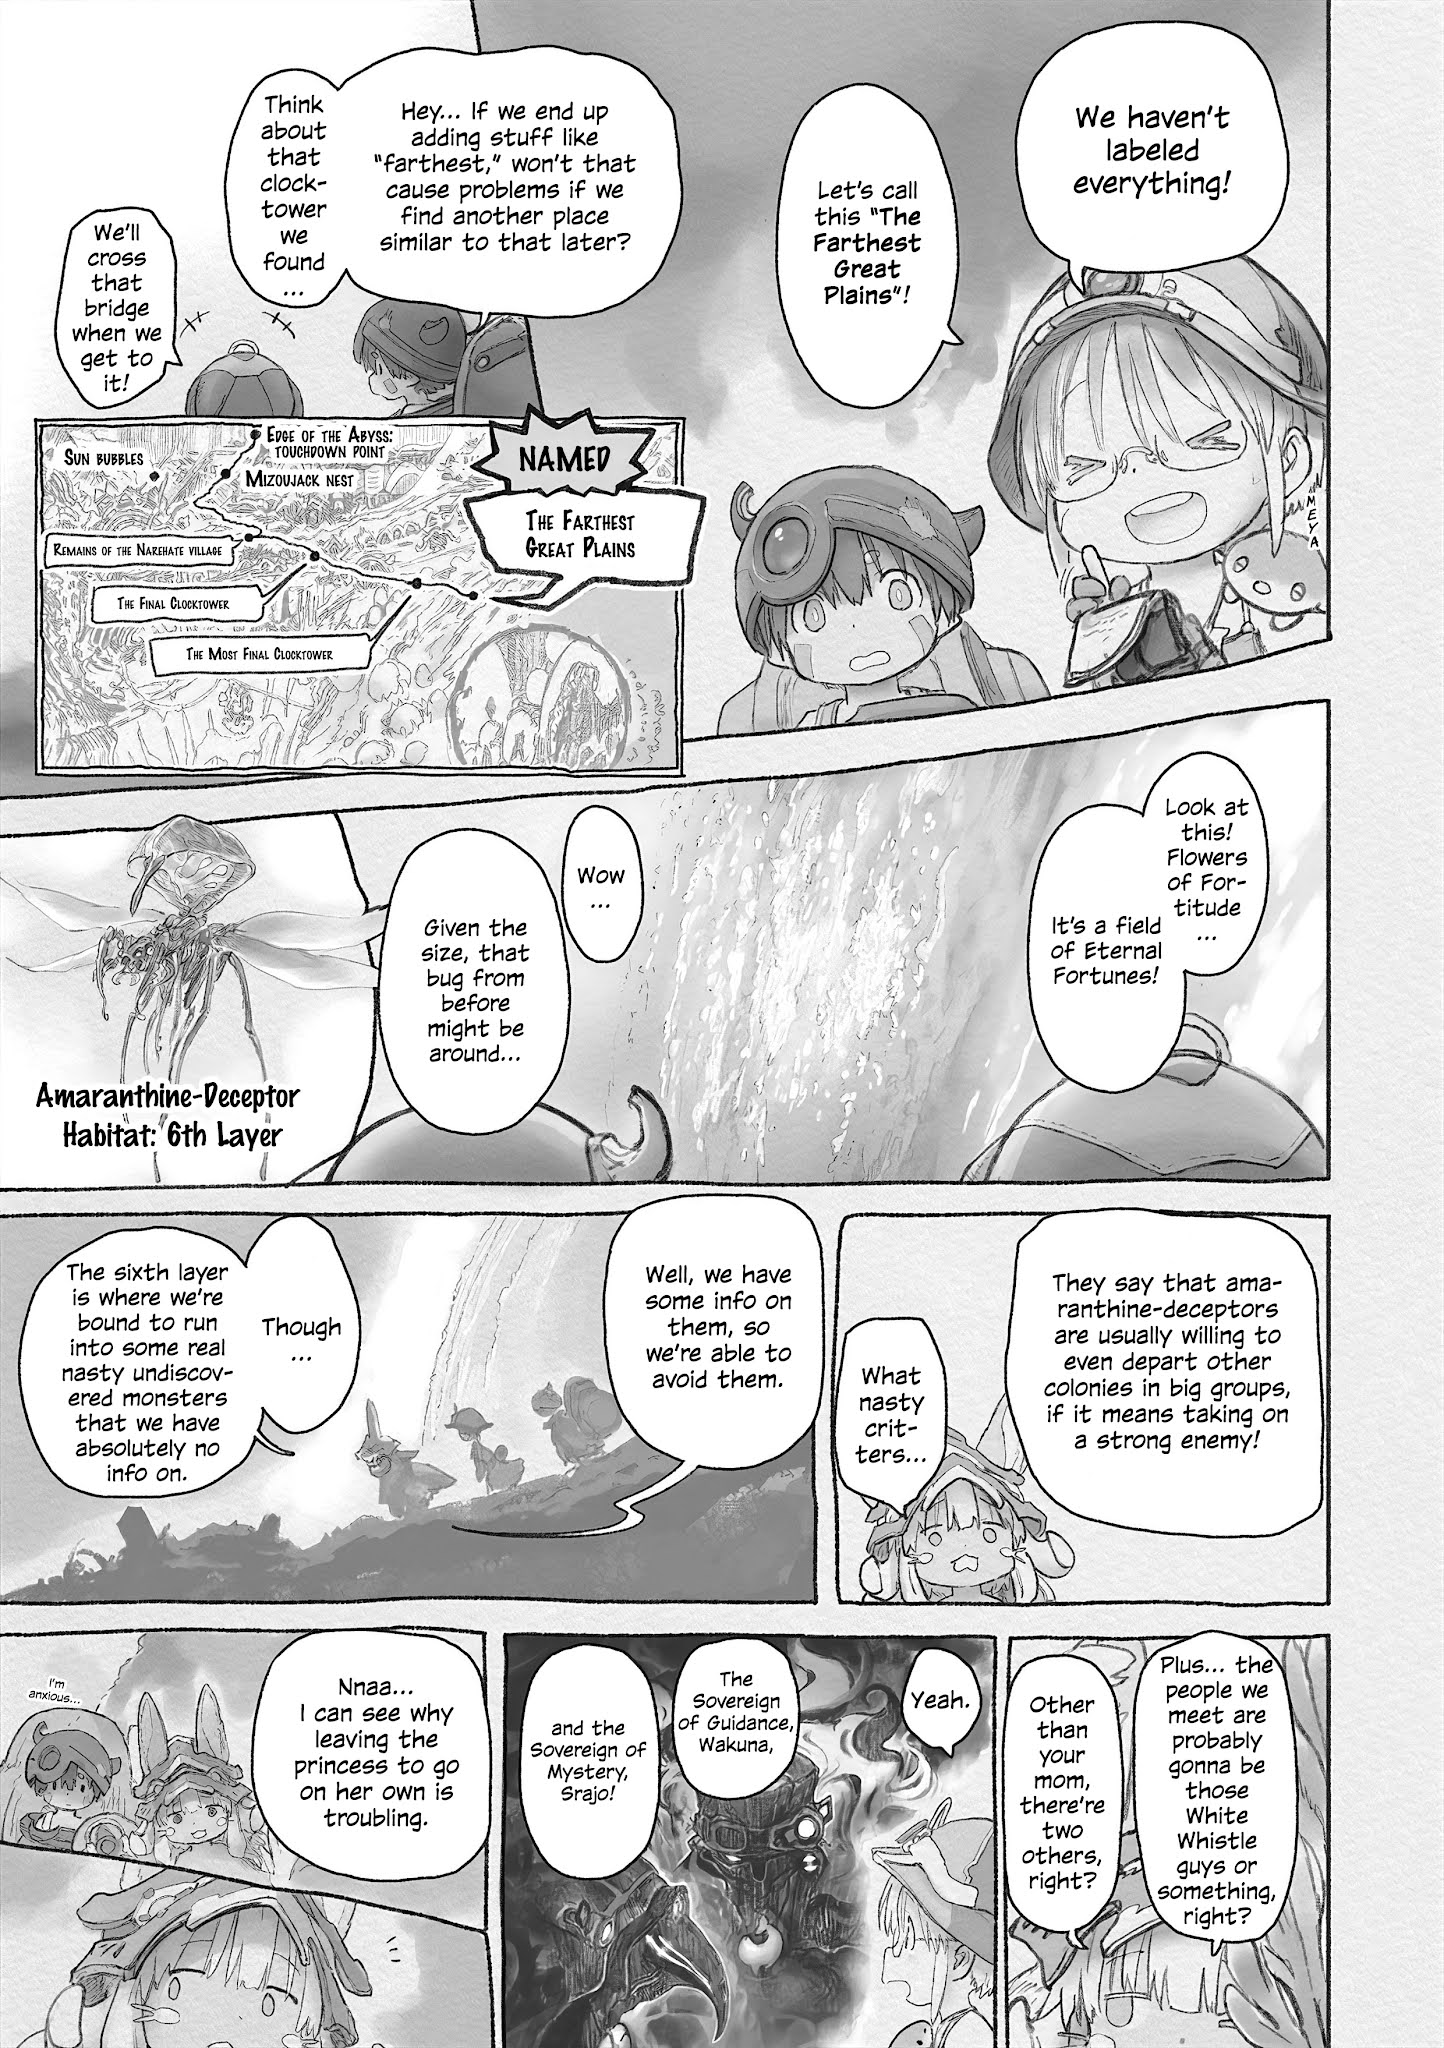 Made In Abyss Chapter 61 Made in Abyss, Chapter 61 - Hello Abyss - Made in Abyss Manga Online